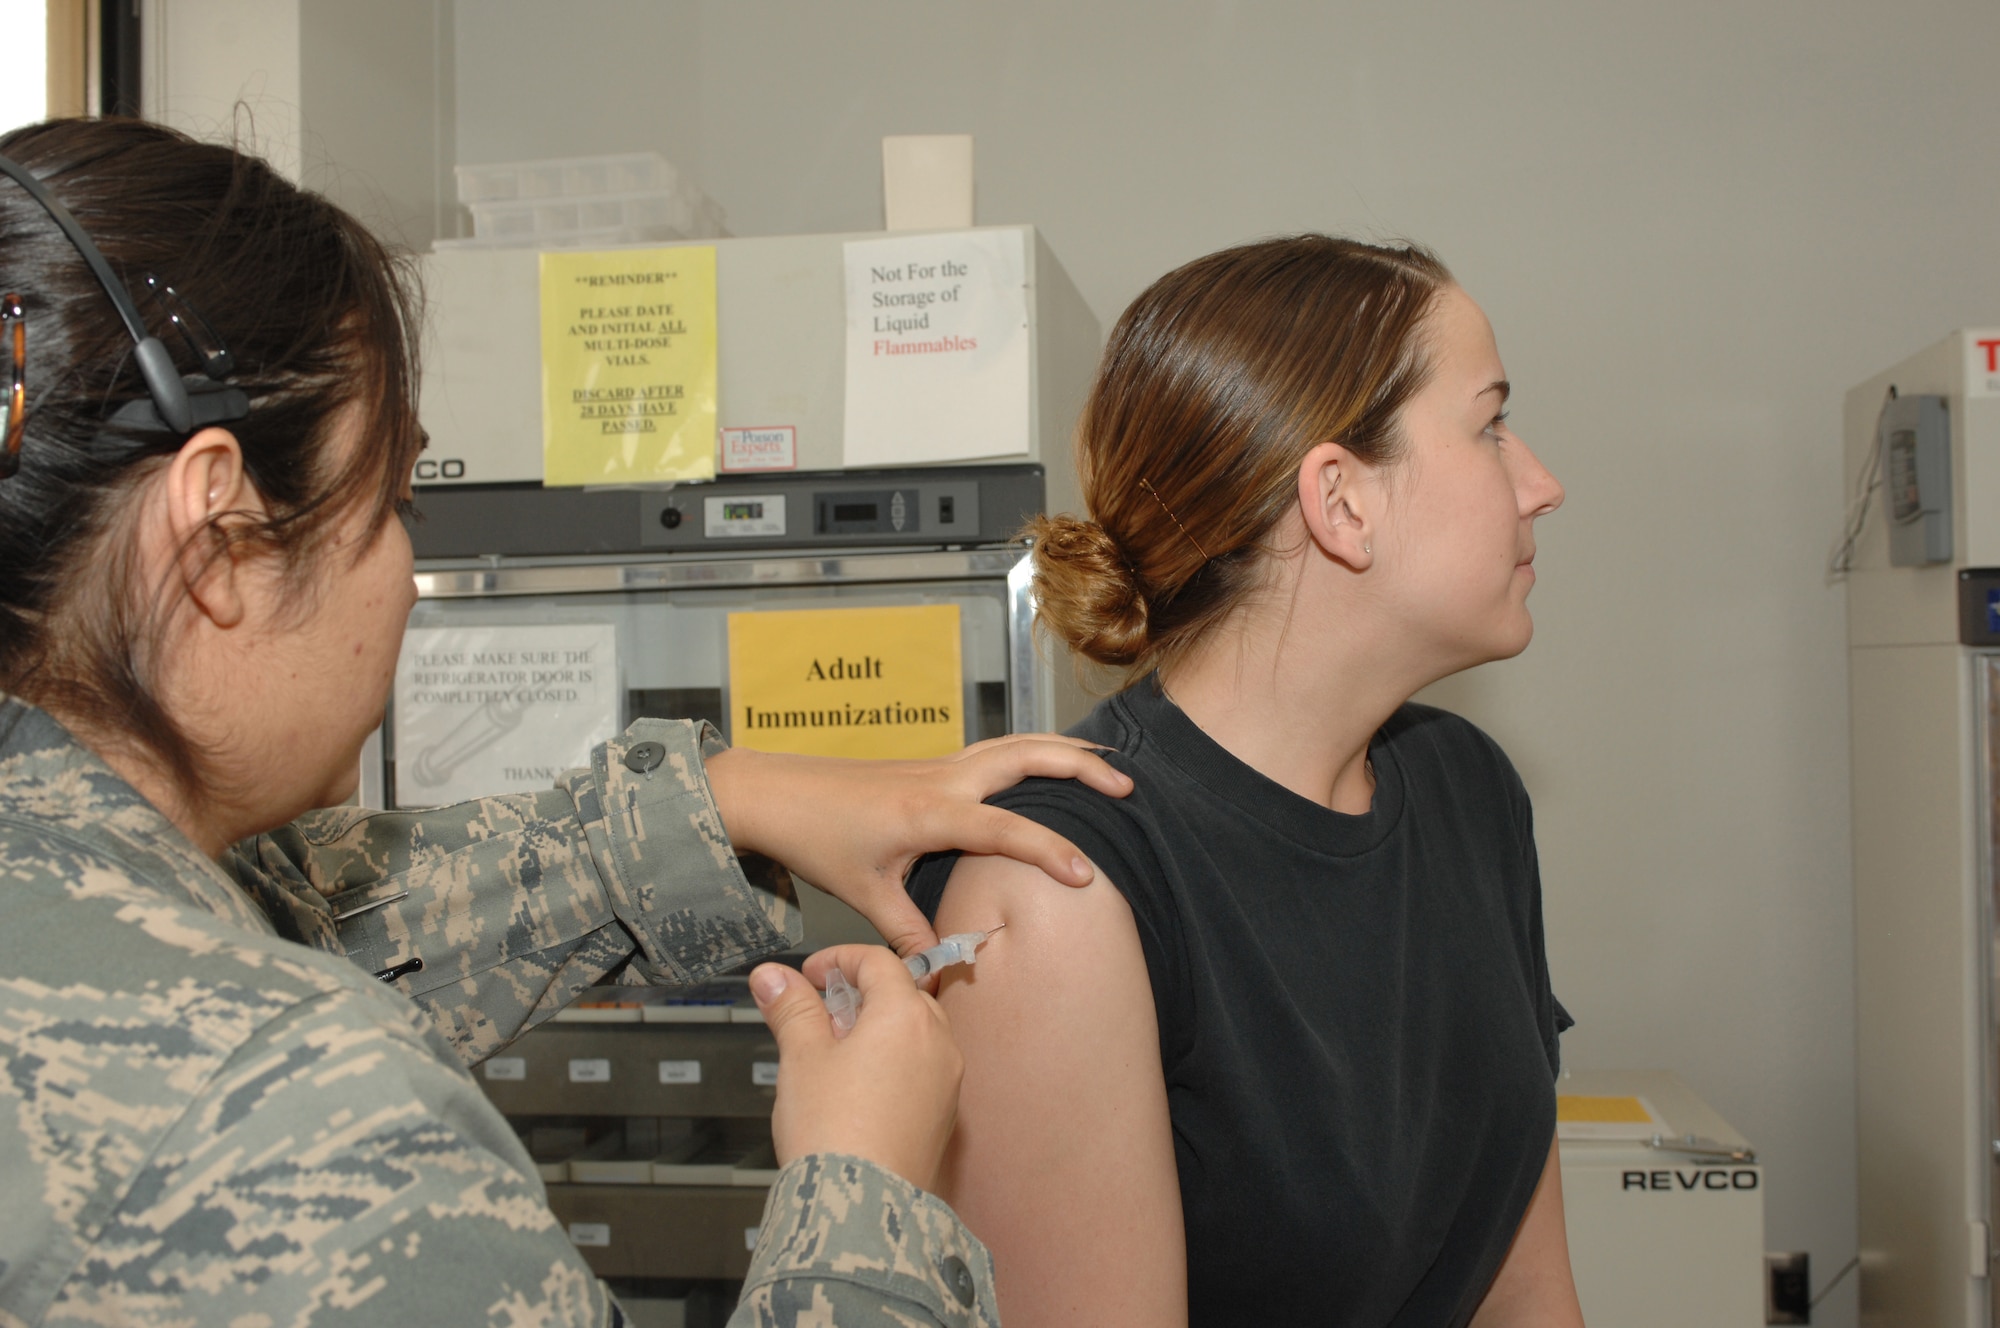 DYESS AIR FORCE BASE, Texas -- Airman 1st Class Jennifer Romig, 7th BW/PA, receives a vaccination from Staff Sgt Melinda Grisby, Alllery/Immunization technician, at the 7th Medical Group, March 10. Dyess Airman must stay current on their vaccination to maintain deployment readiness. (U.S Air Force photo by Senior Airman Courtney Richardson)